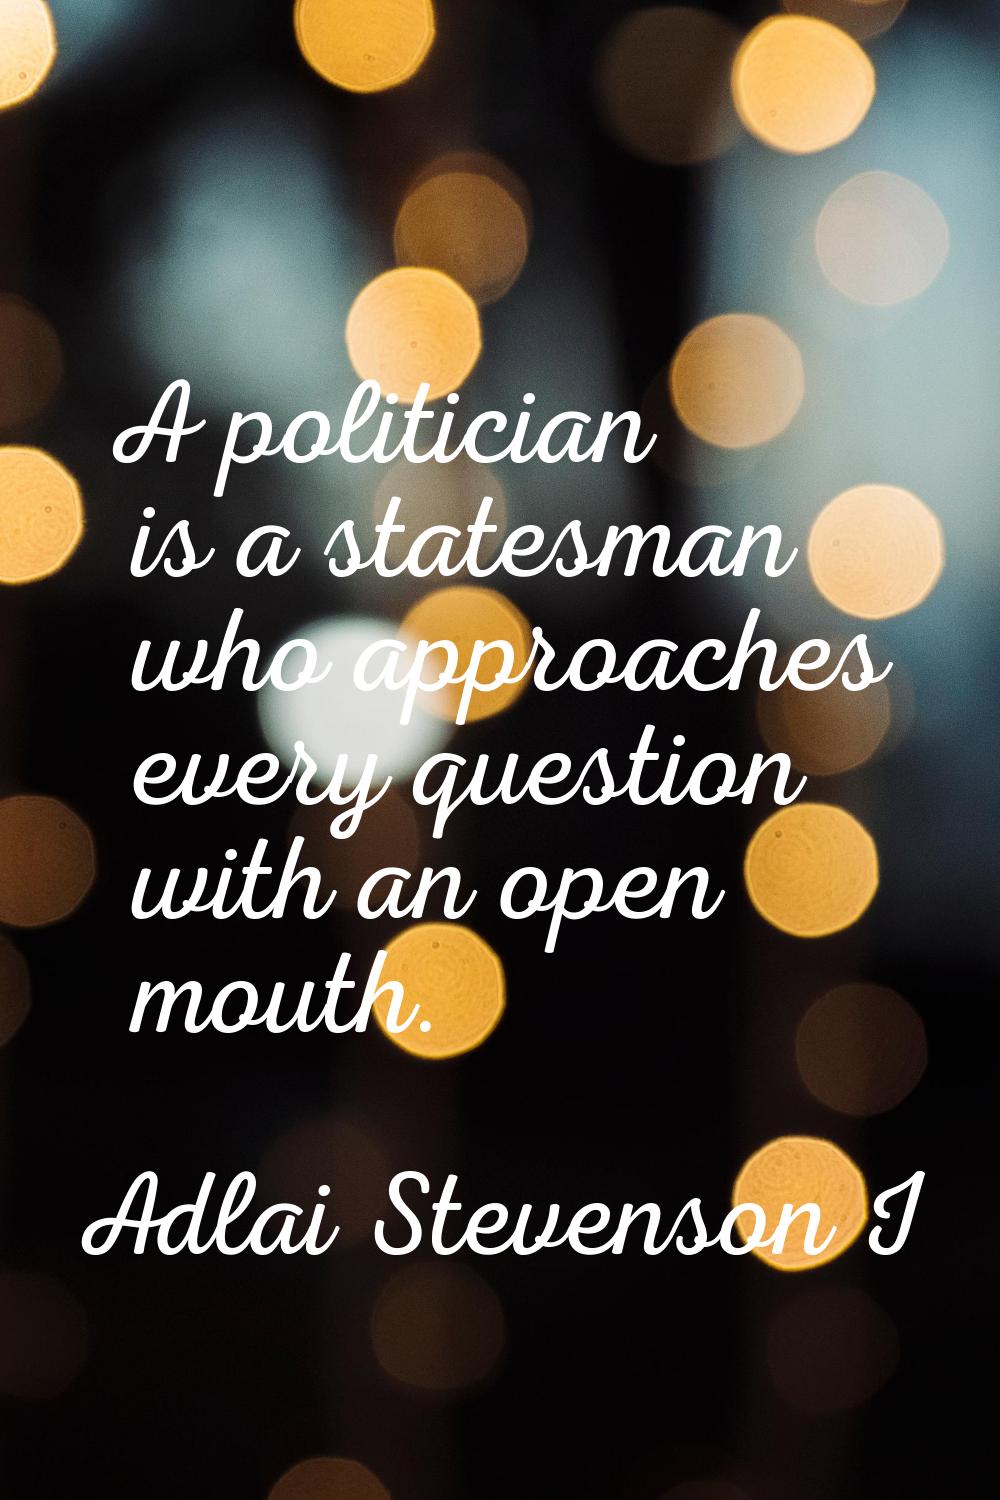 A politician is a statesman who approaches every question with an open mouth.